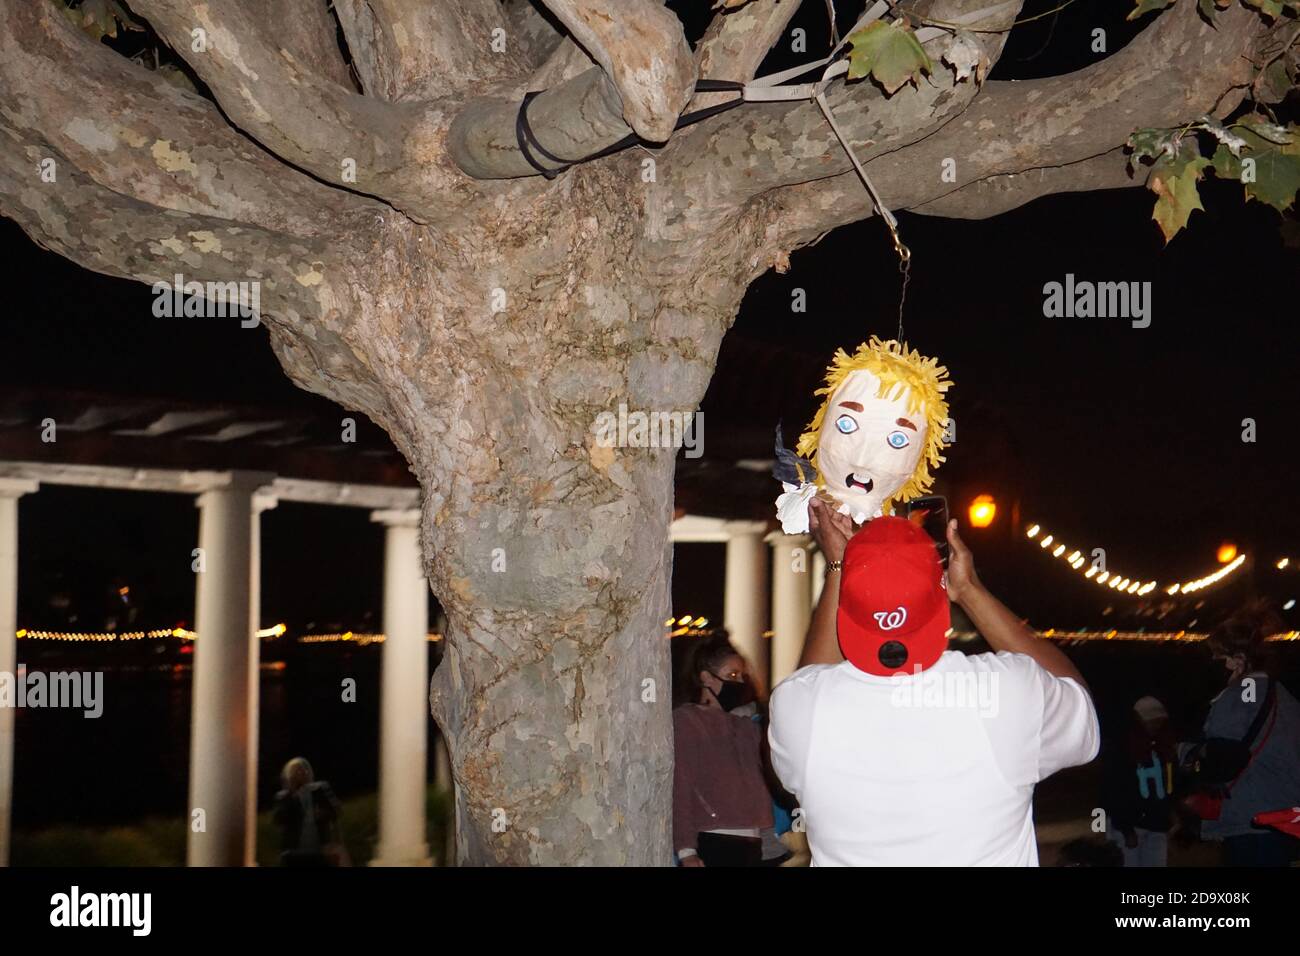 Oakland, California, USA. 7 Nov, 2020. Joe Biden/Kamala Harris supporters fill the streets to celebrate their victory over Donald Trump in the USA Presidential Election. A man takes a picture of the head of a Donald Trump piñata hanging from a tree in Vice President-elect Kamala Harris' hometown. Credit: Kristin Cato/Alamy Live News Stock Photo